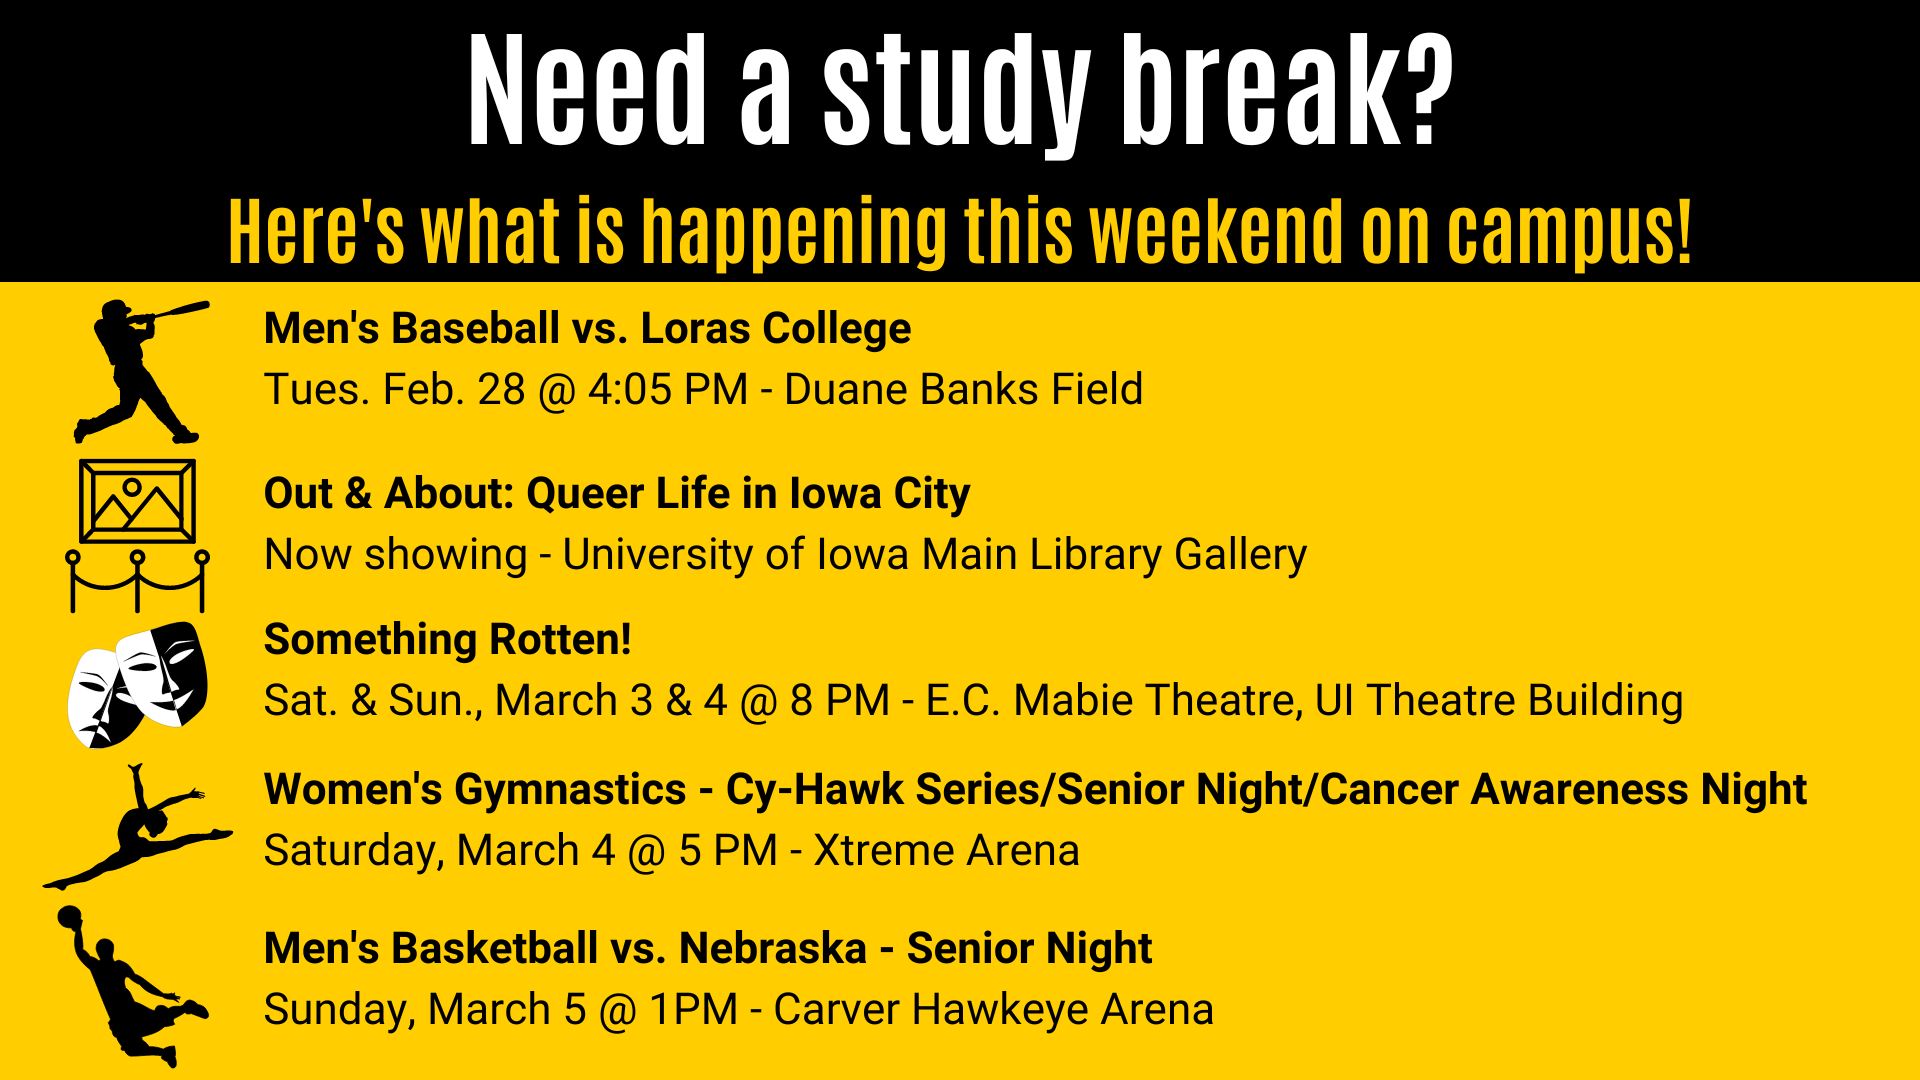 Something Rotten!  Sat. & Sun., March 3 & 4 @ 8 PM - E.C. Mabie Theatre, UI Theatre Building Out & About: Queer Life in Iowa City Now showing - University of Iowa Main Library Gallery Need a study break? Here's what is happening this weekend on campus! Men's Baseball vs. Loras College  Tues. Feb. 28 @ 4:05 PM - Duane Banks Field Women's Gymnastics - Cy-Hawk Series/Senior Night/Cancer Awareness Night Saturday, March 4 @ 5 PM - Xtreme Arena Men's Basketball vs. Nebraska - Senior Night  Sunday, March 5 @ 1PM - Carver Hawkeye Arena